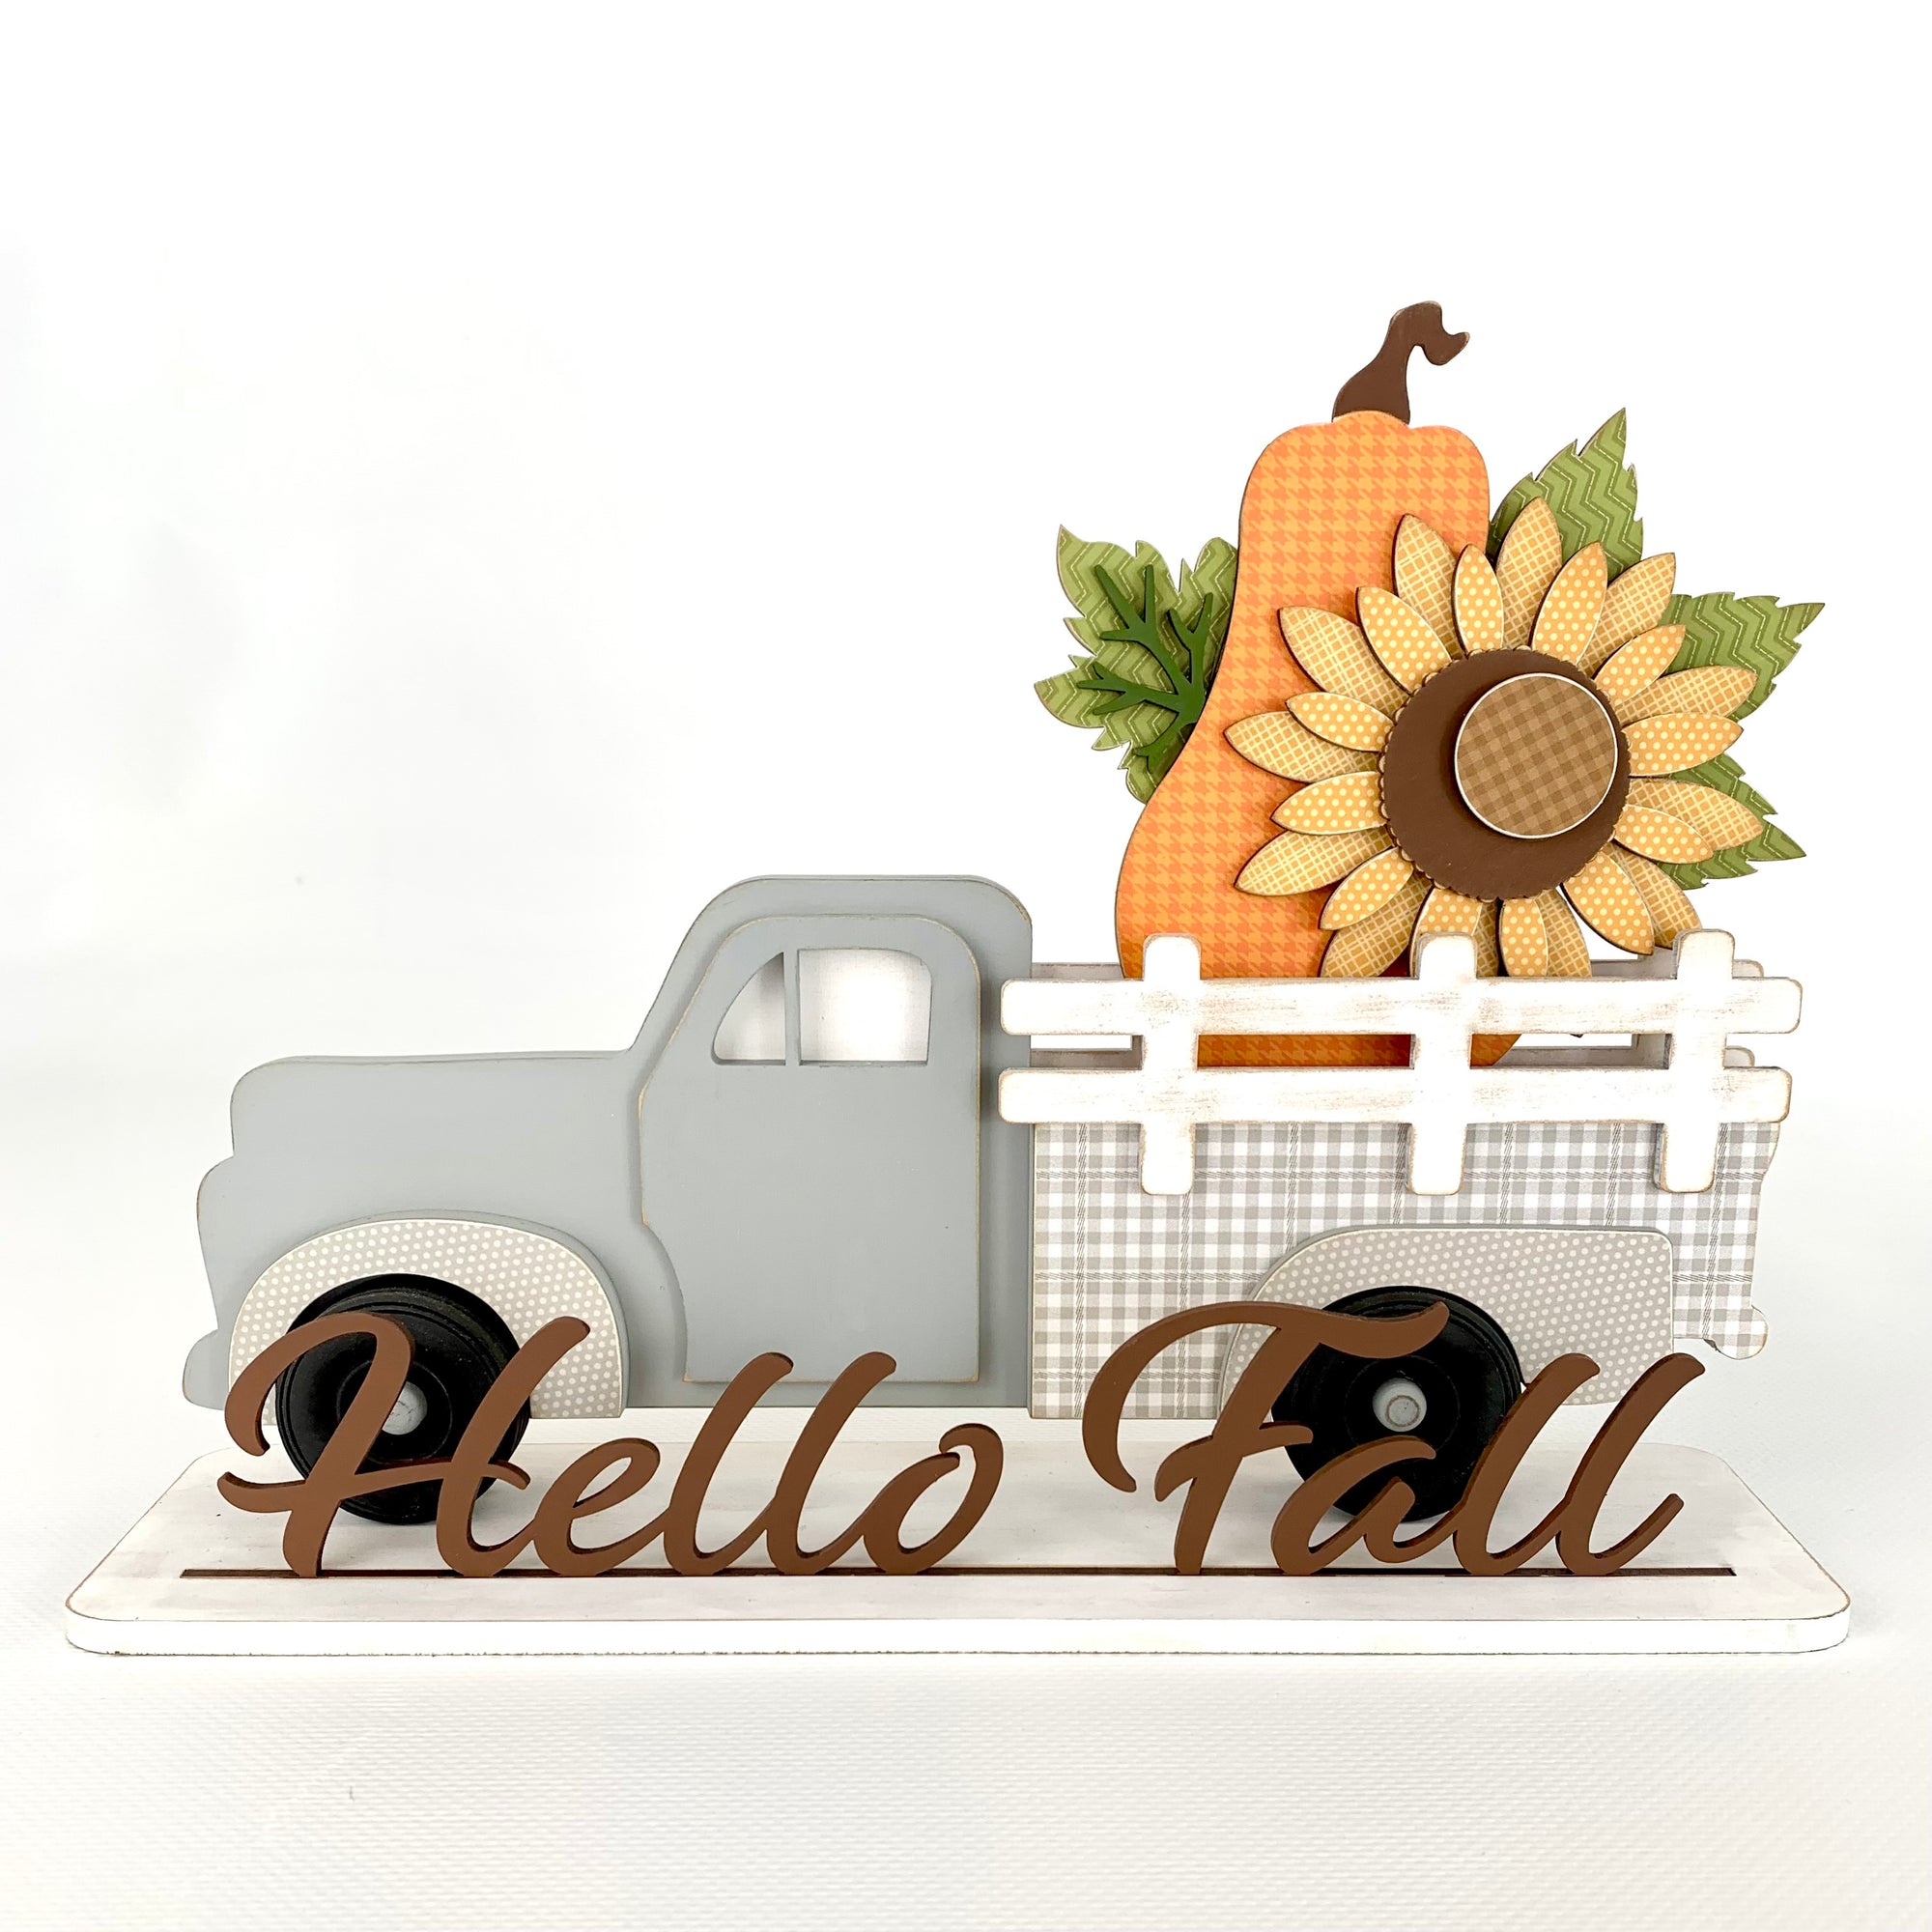 Interchangeable pick up truck with removable inserts to change monthly or seasonally.  Truck shown with a fall sunflower and orange pumpkin. This is a wood decor craft kit.